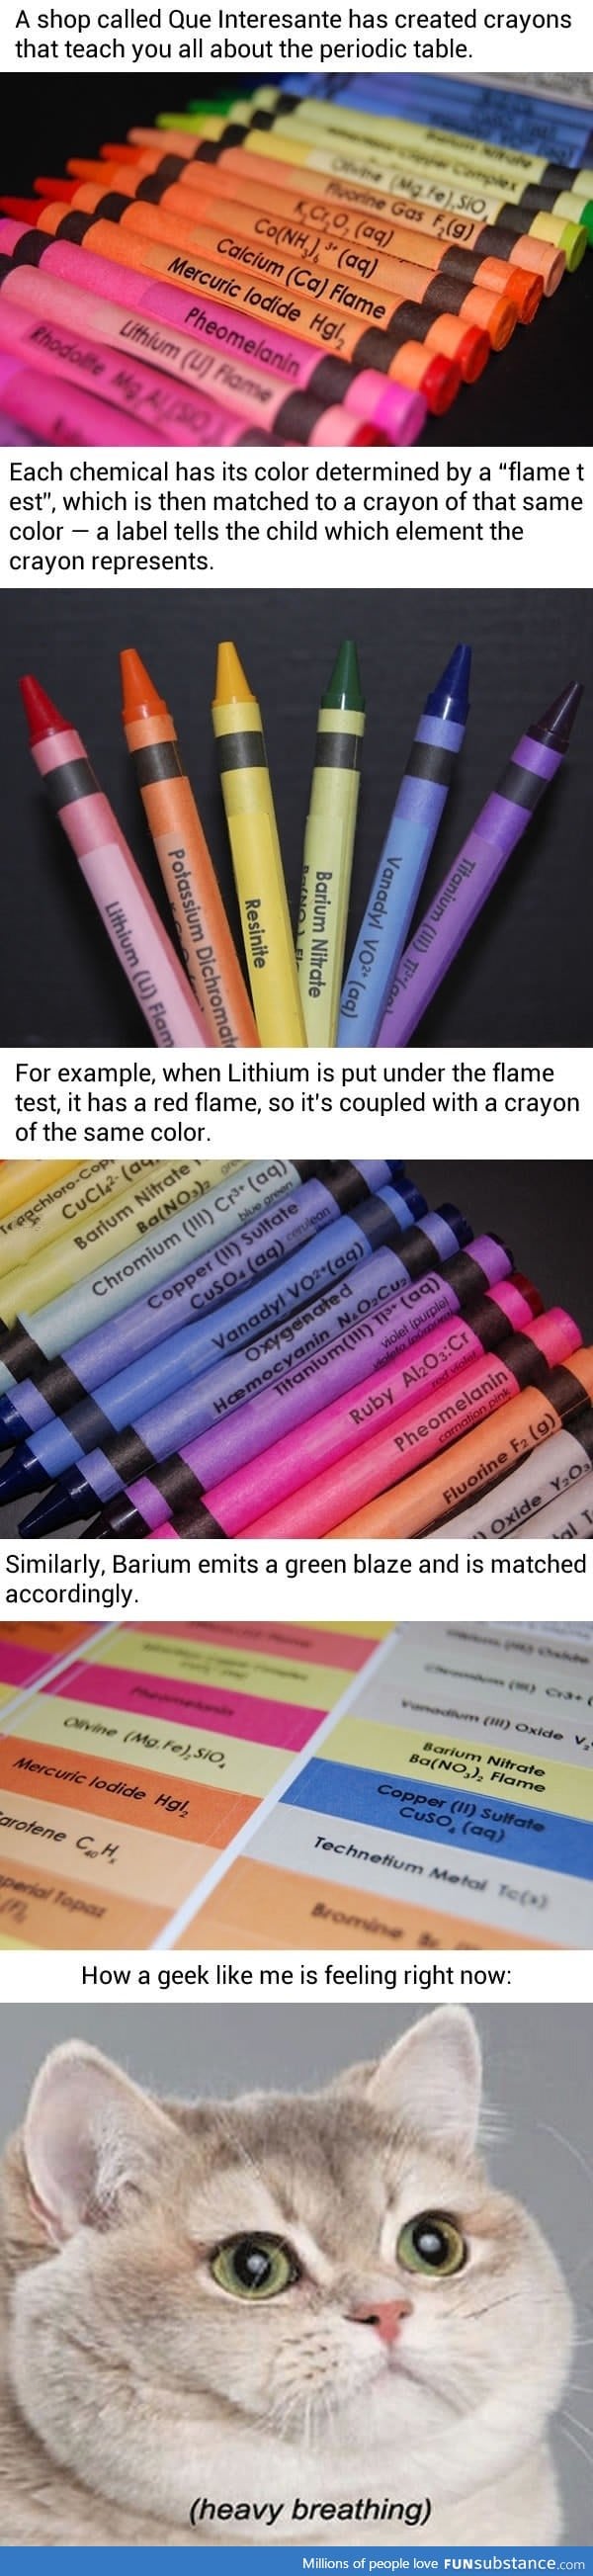 There are "Element" Crayons that help you learn the Periodic Table